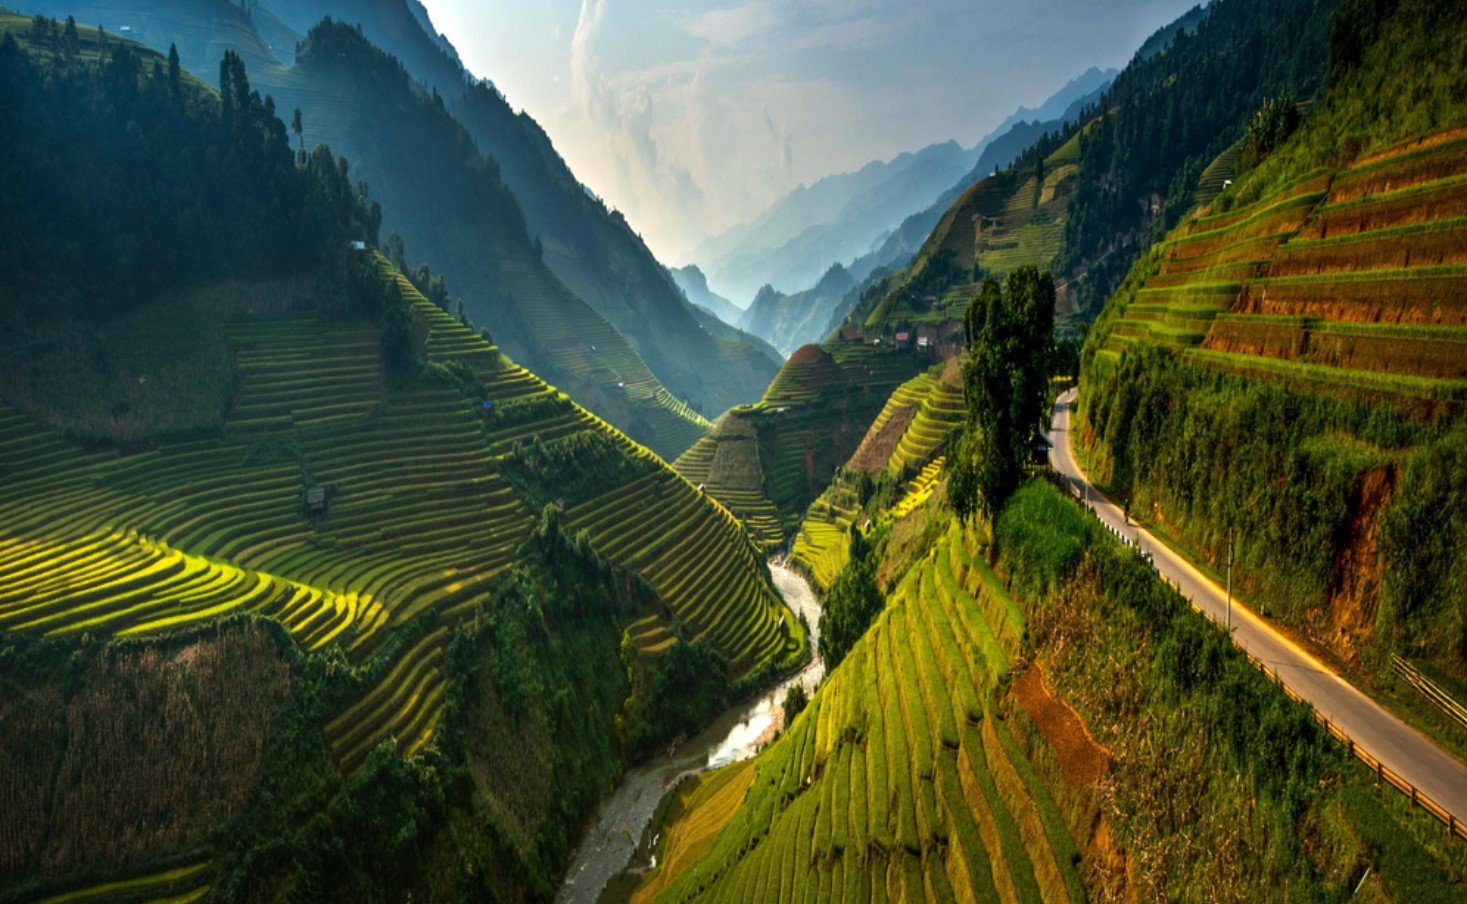 Sapa valley is extremely beautiful